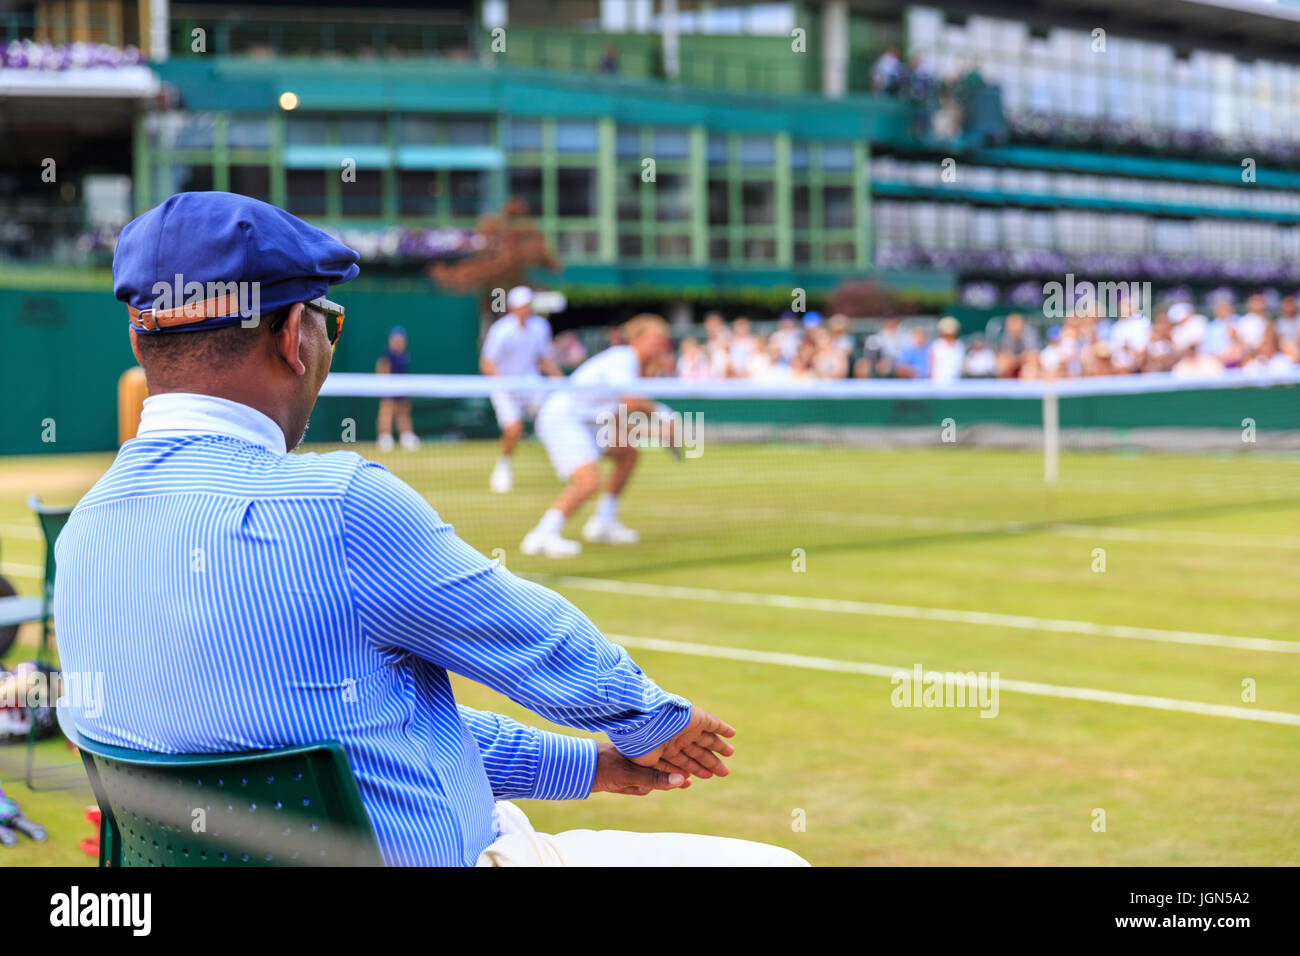 A  Wimbledon line judge, or line umpire, calls a shot in at the Wimbledon Tennis Championships 2017, All England Lawn Tennis and Croquet Club, London Stock Photo